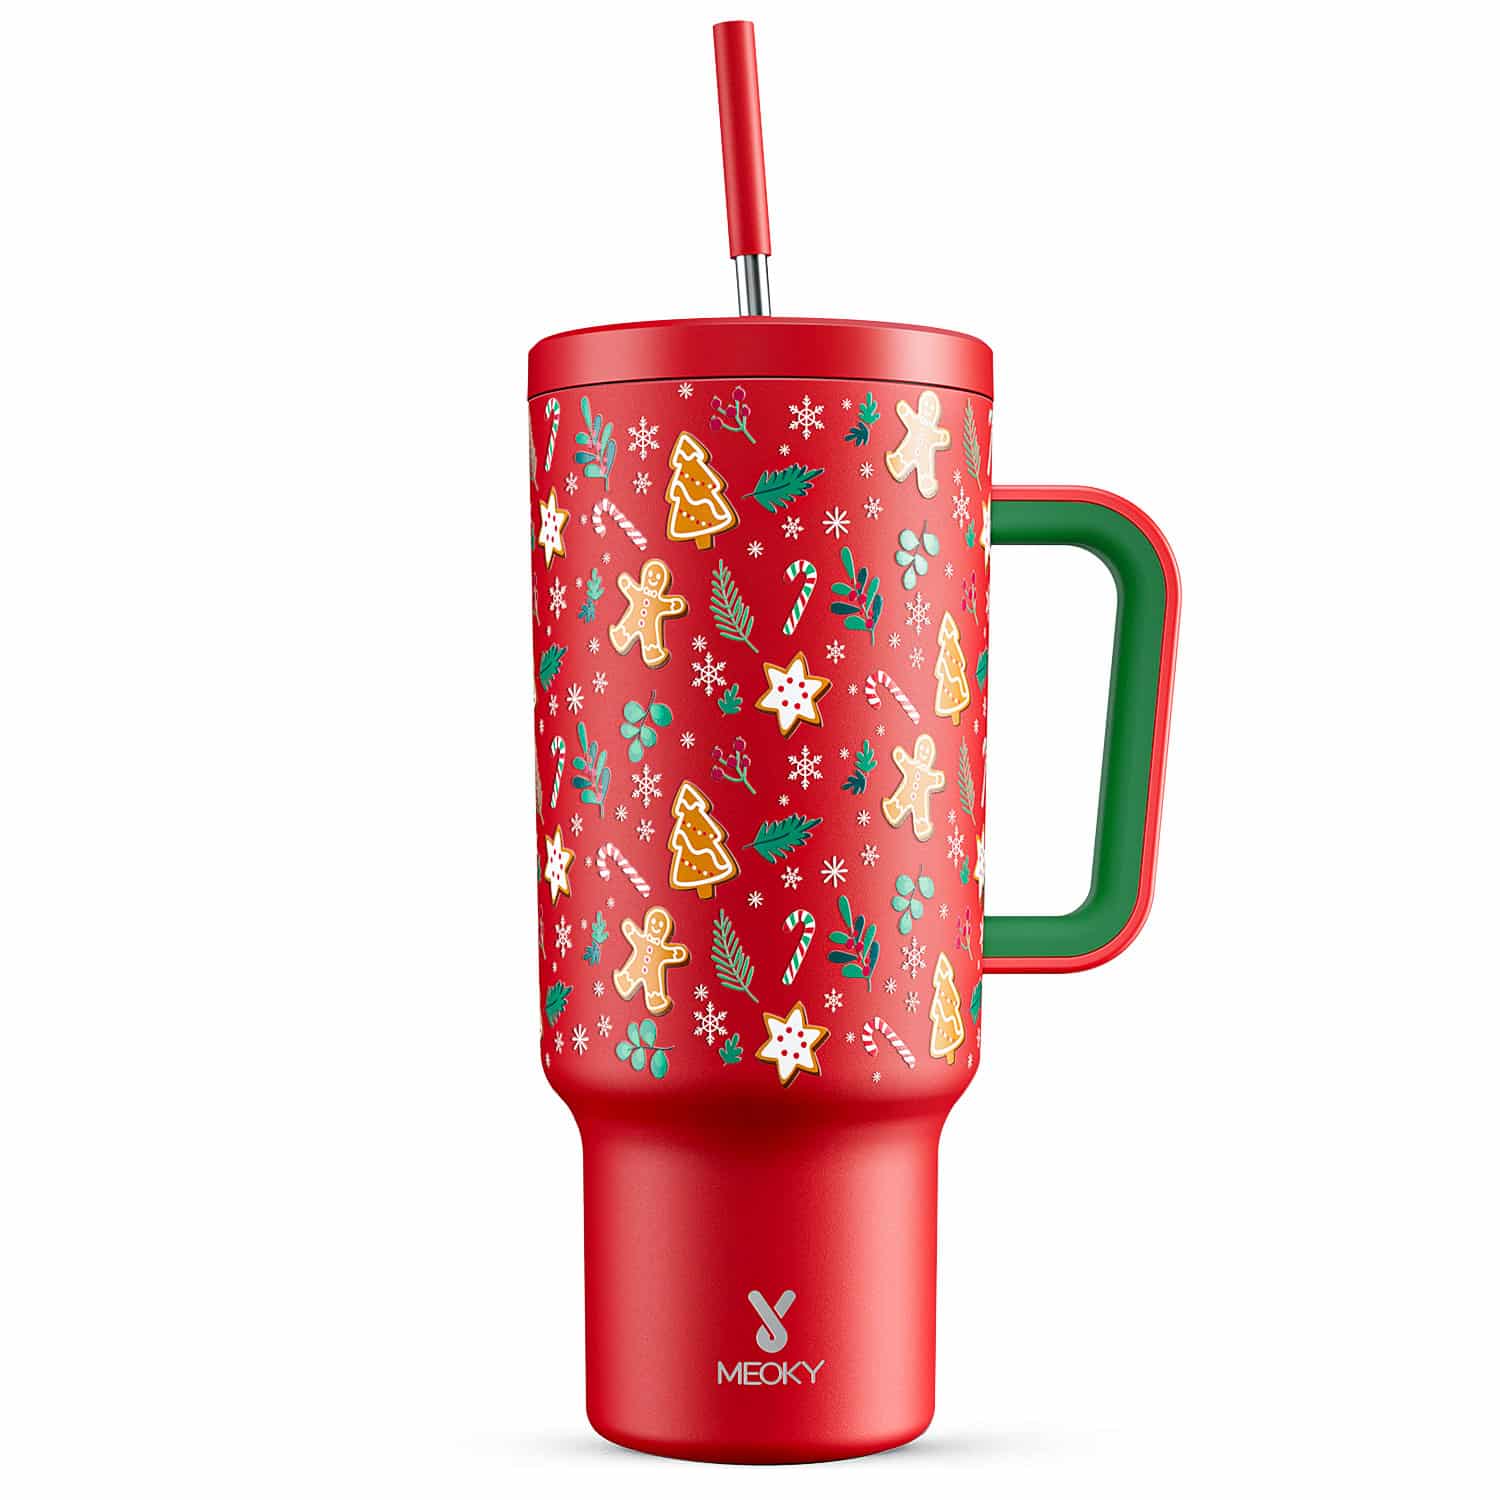 https://meoky.com/wp-content/uploads/2023/10/Meoky-40oz-tumbler-with-handle-and-straw-lid-Christmas-special-edition-Red.jpg